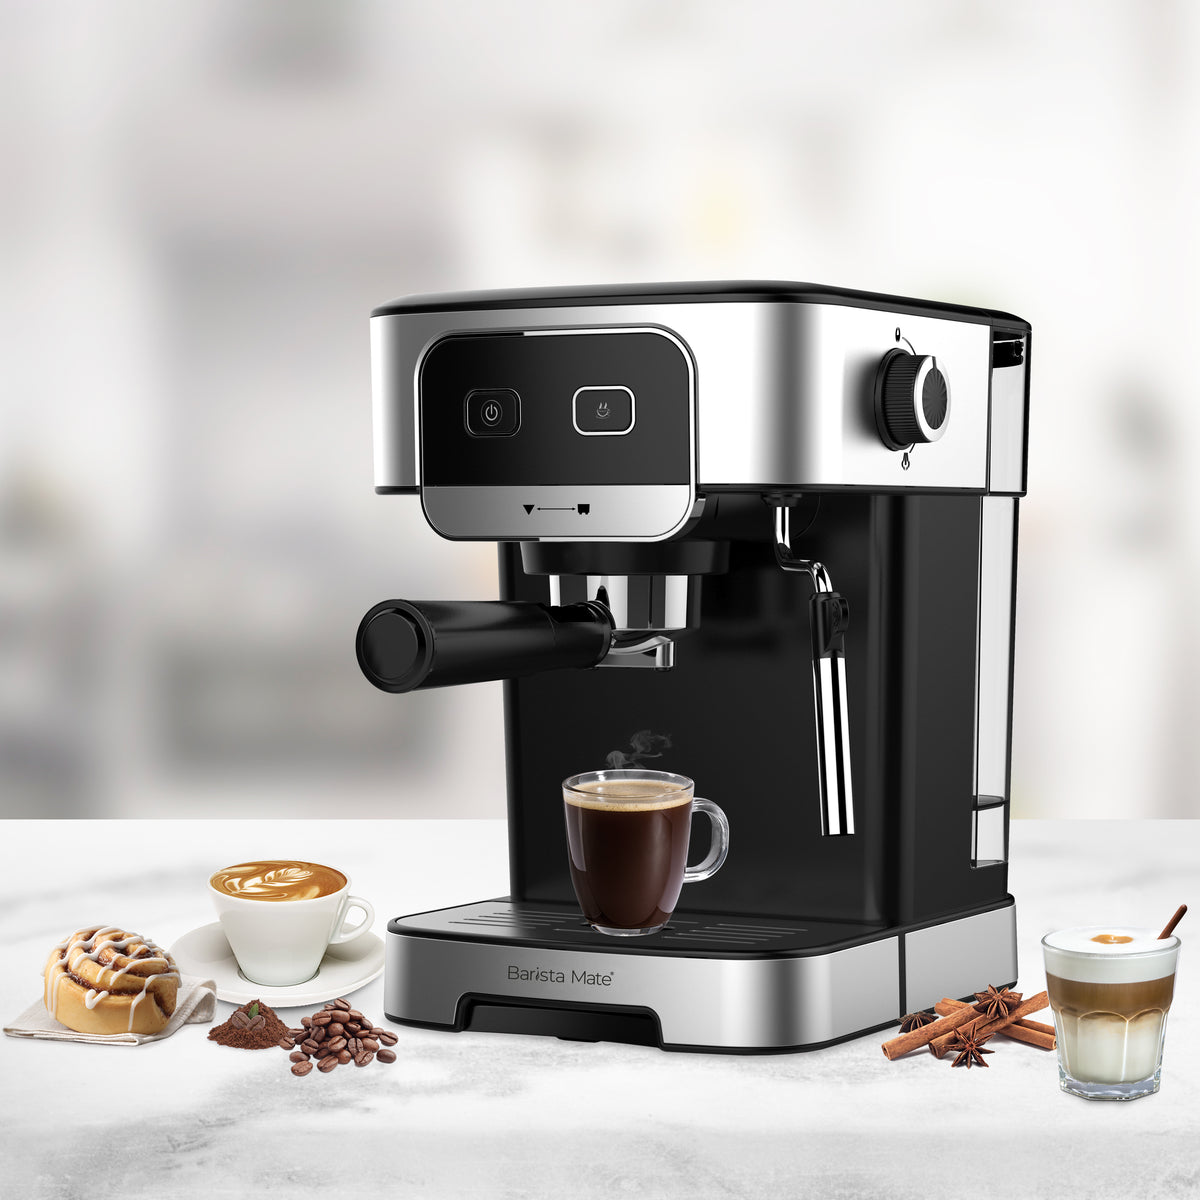 Espresso Coffee Machine with 3 kinds of coffee in cups surrounding it..